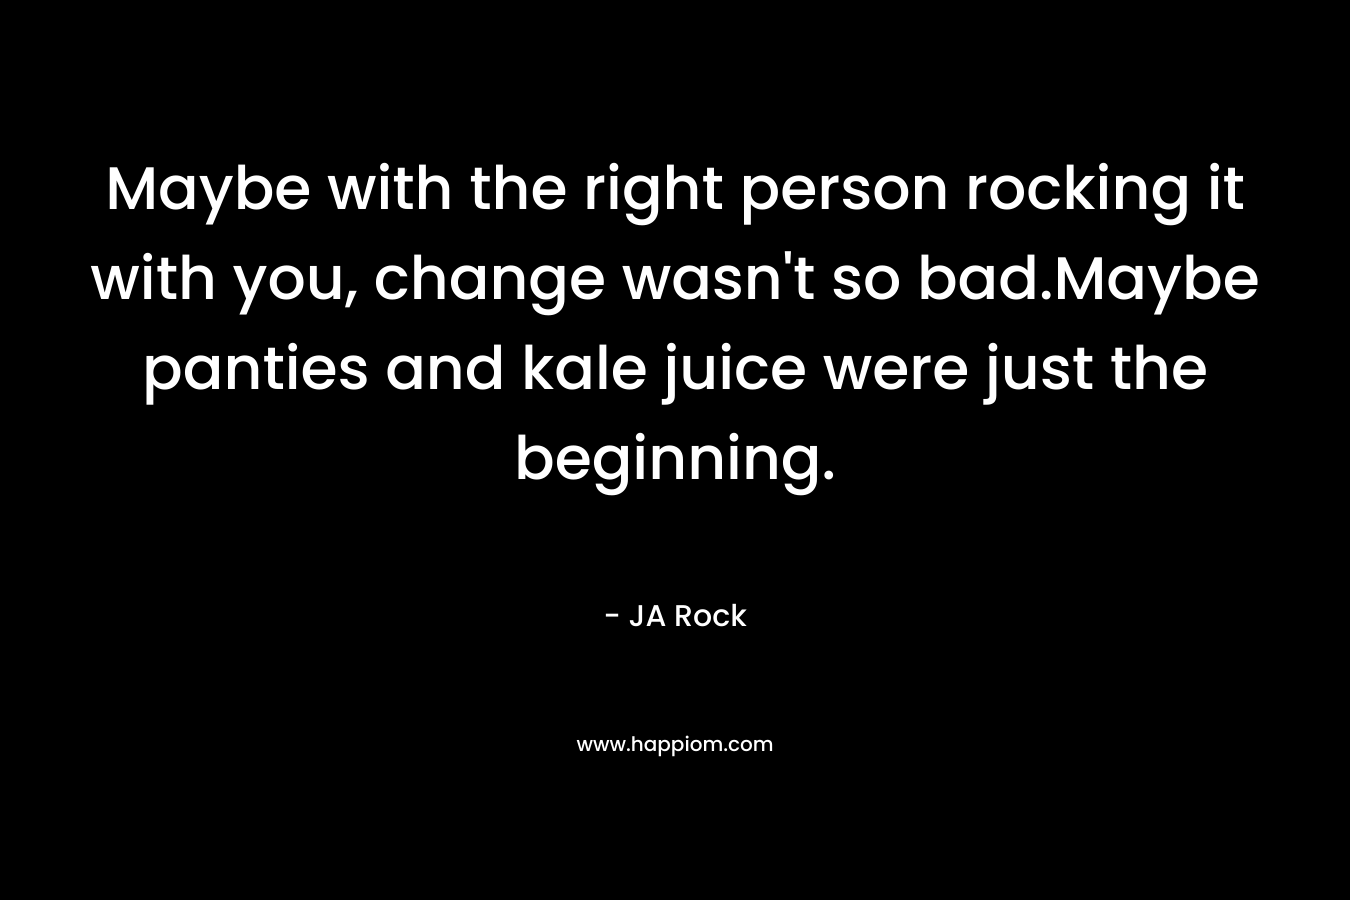 Maybe with the right person rocking it with you, change wasn’t so bad.Maybe panties and kale juice were just the beginning. – JA Rock